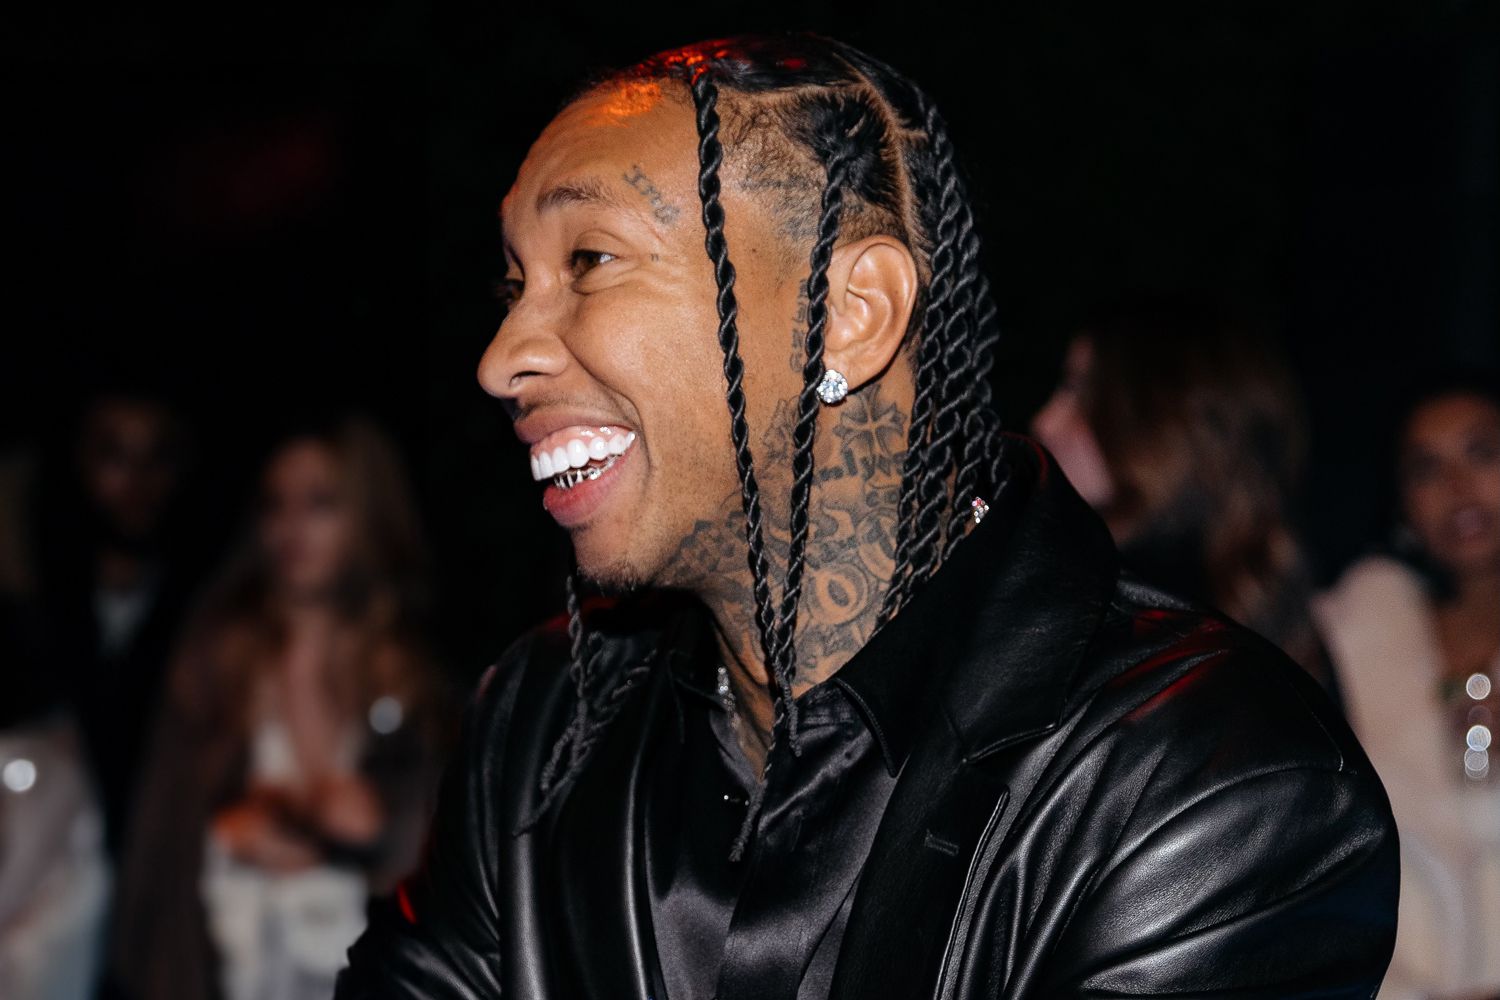 tyga-celebrates-34th-birthday-with-star-studded-parties-in-las-vegas-and-los-angeles